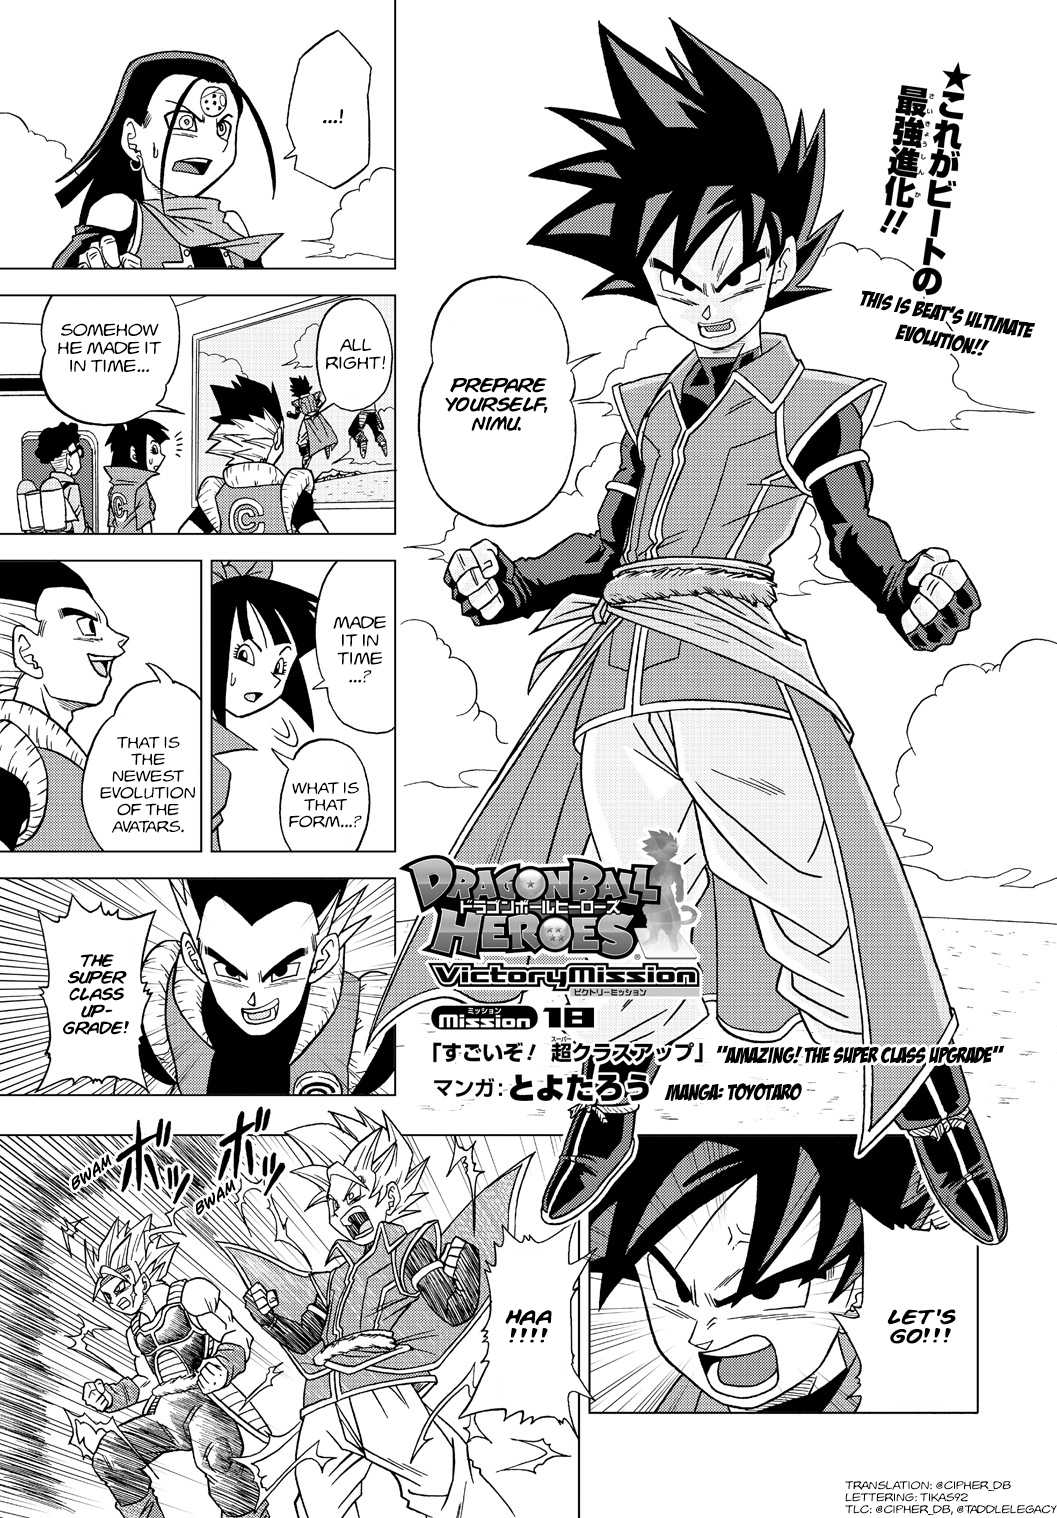 Dragon Ball Heroes - Victory Mission Chapter 18: Amazing! The Super Class Upgrade - Picture 1